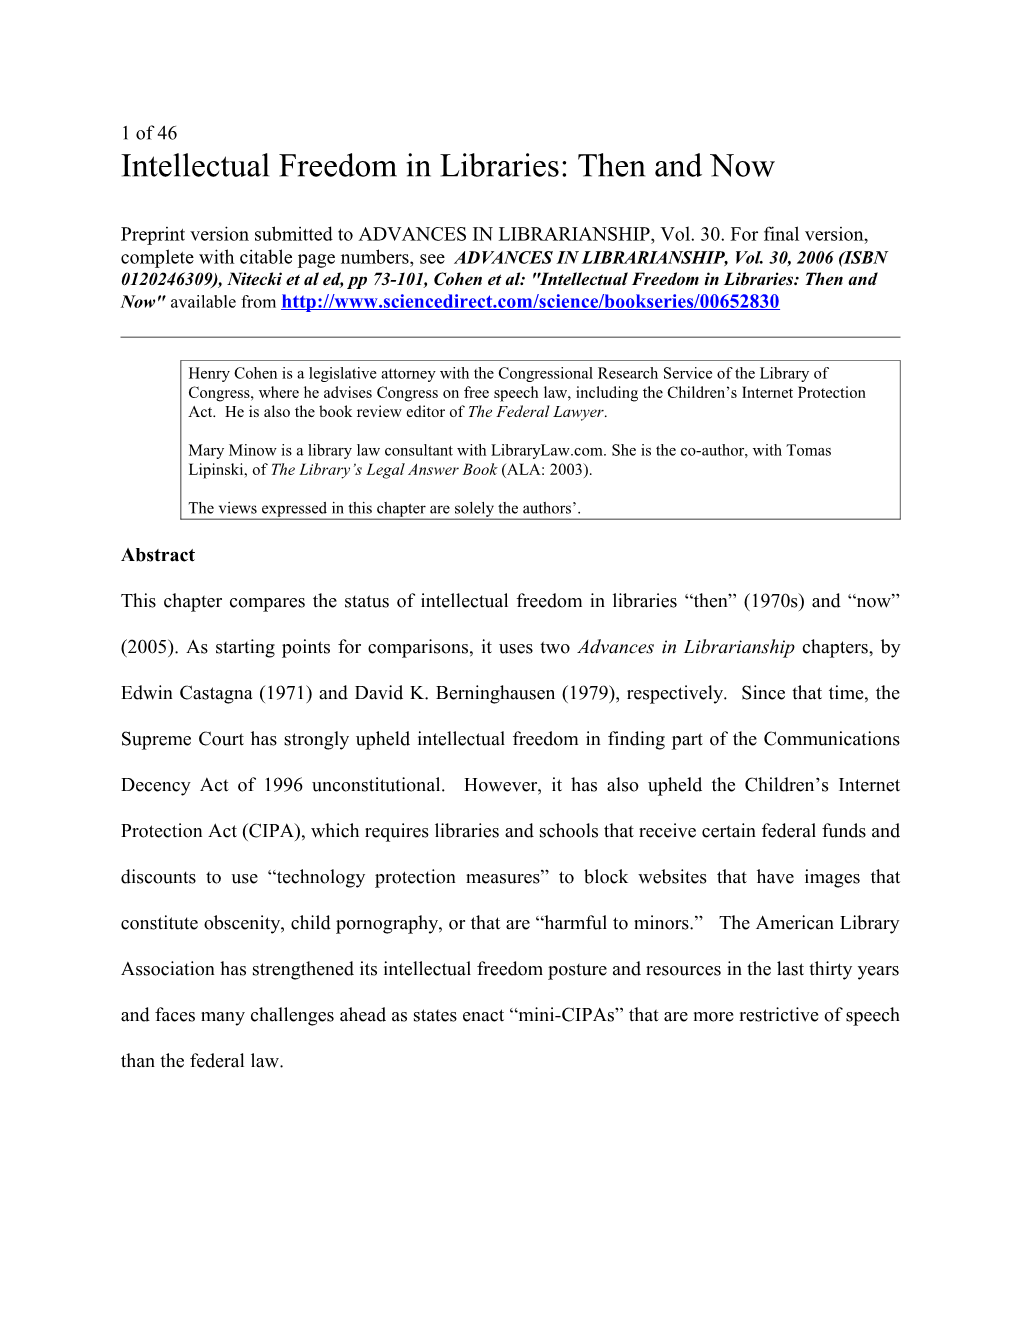 Intellectual Freedom in Libraries: Then and Now